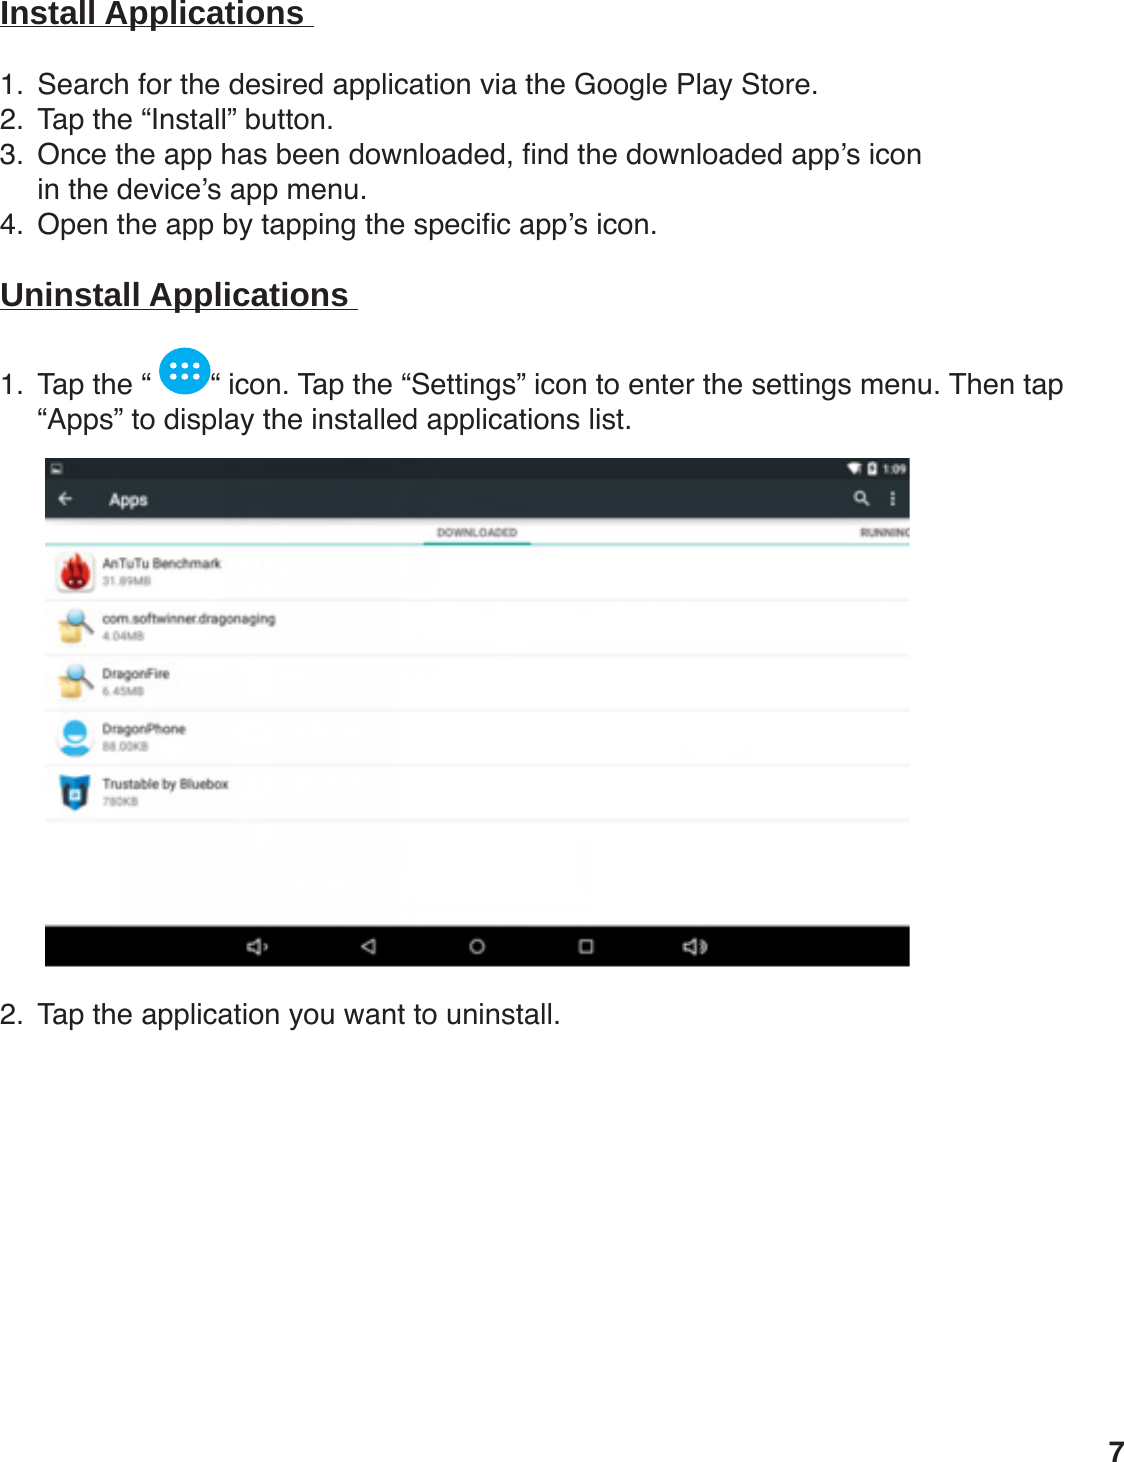 Install Applications 1.  Search for the desired application via the Google Play Store. 2.  Tap the “Install” button.3.  Once the app has been downloaded, nd the downloaded app’s icon  in the device’s app menu.4.  Open the app by tapping the specic app’s icon.  Uninstall Applications 1.  Tap the “  “ icon. Tap the “Settings” icon to enter the settings menu. Then tap “Apps” to display the installed applications list.                2.  Tap the application you want to uninstall.              7